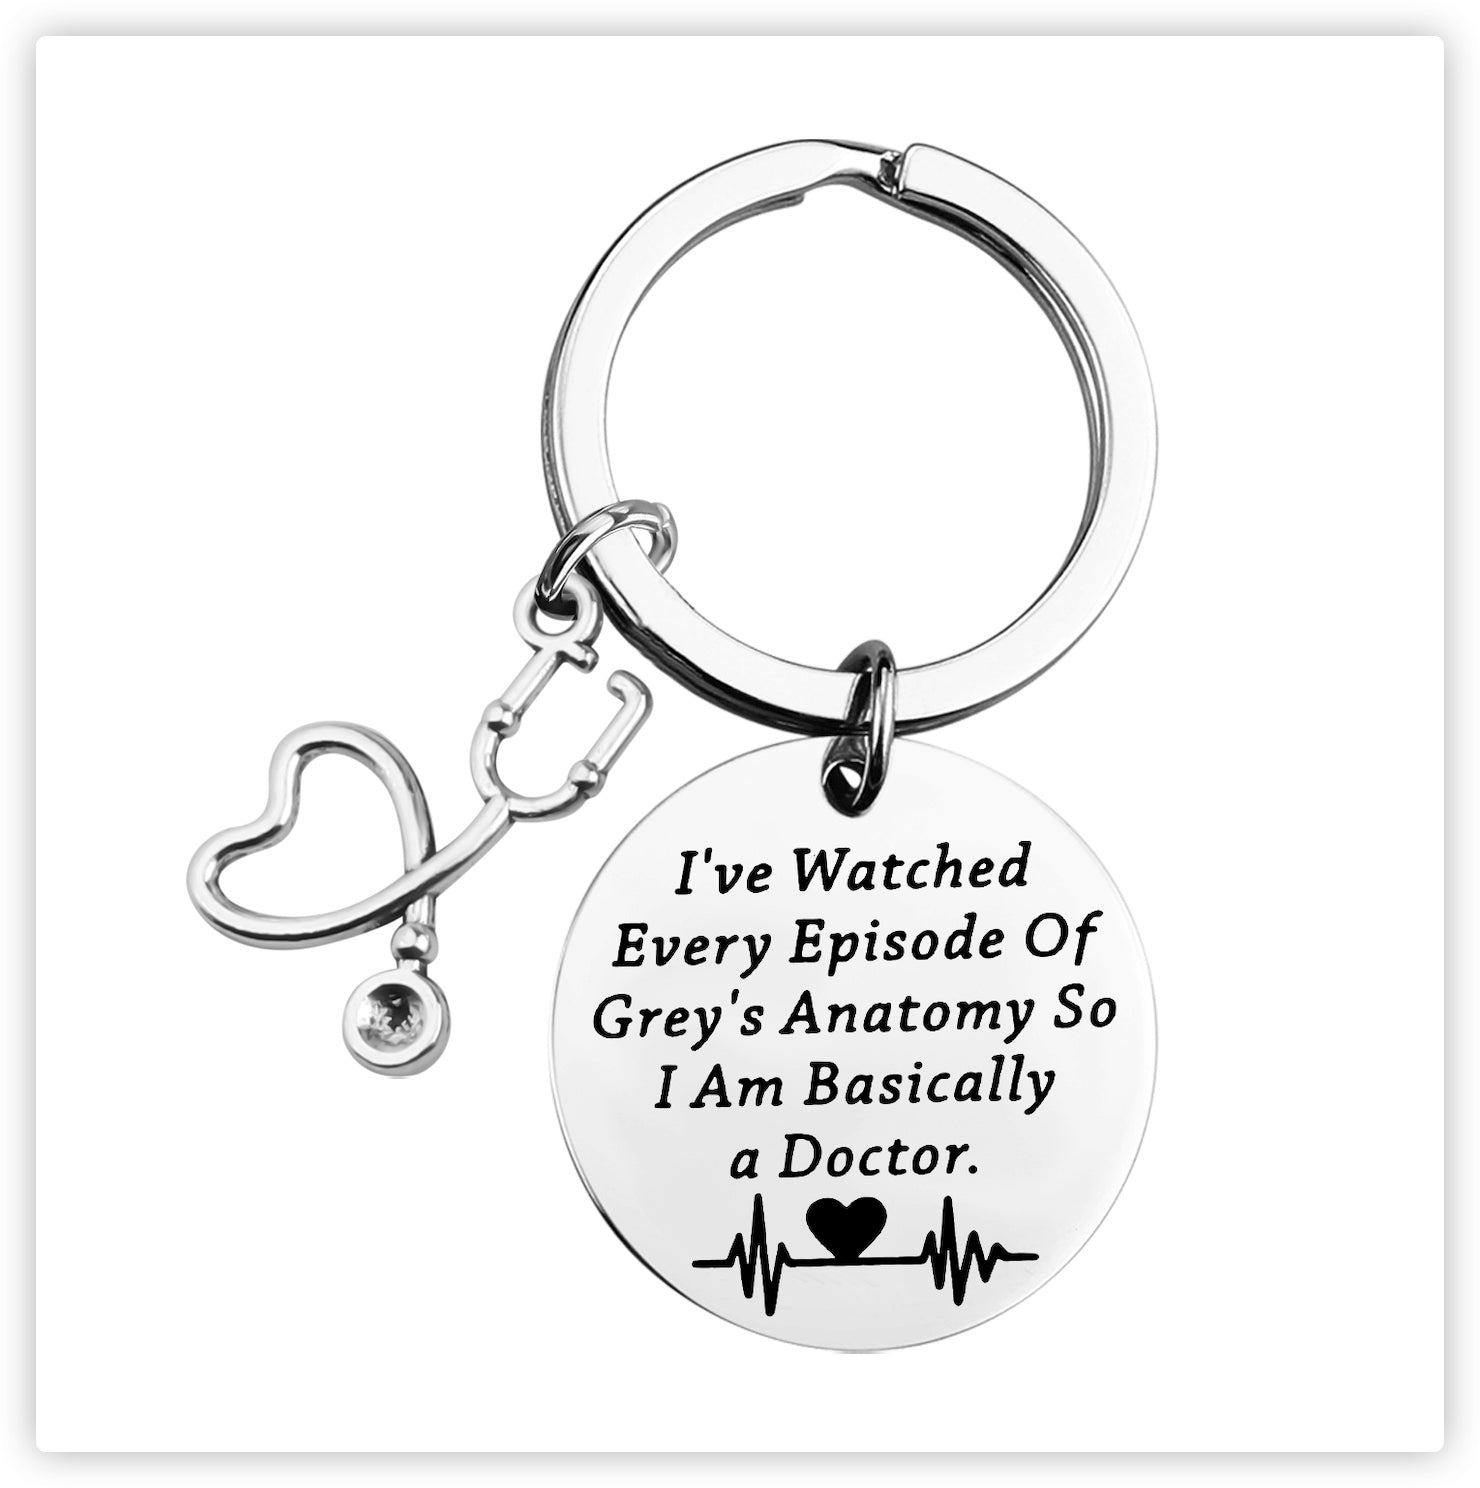 Grey's Anatomy Inspired Gift Funny Doctor Keychain I've Watched Every Episode of Grey's Anatomy So I am Basically a Doctor Gift for Doctor Nurse